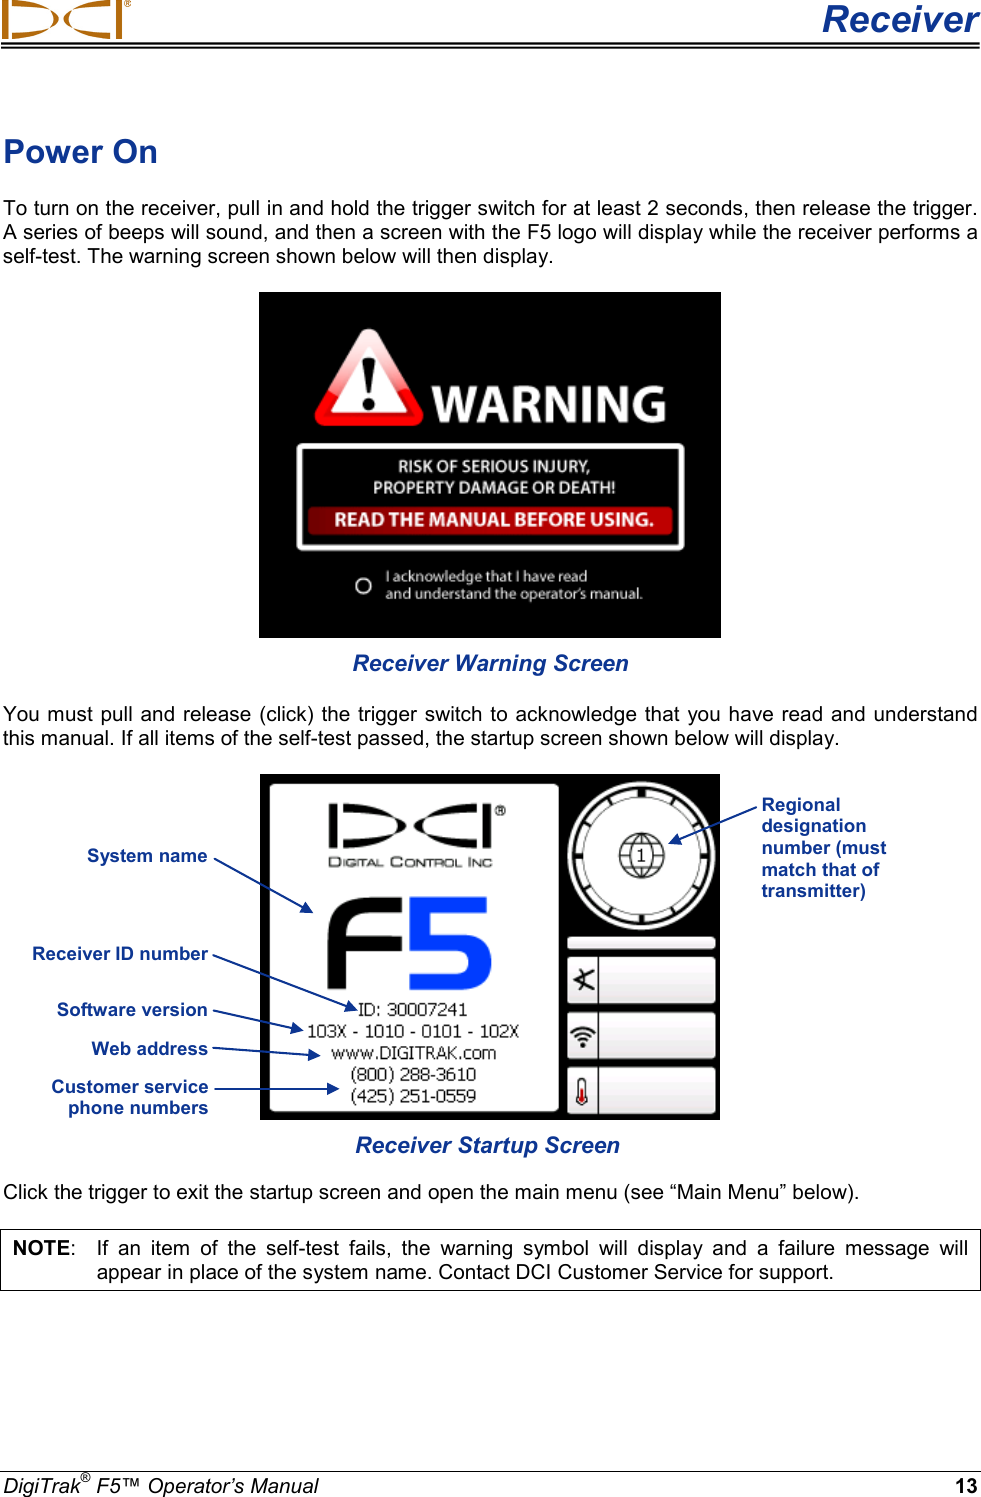  Receiver DigiTrak® F5™ Operator’s Manual 13 Power On  To turn on the receiver, pull in and hold the trigger switch for at least 2 seconds, then release the trigger. A series of beeps will sound, and then a screen with the F5 logo will display while the receiver performs a self-test. The warning screen shown below will then display.  Receiver Warning Screen You must pull and release (click) the trigger switch to acknowledge that you have read and understand this manual. If all items of the self-test passed, the startup screen shown below will display.  Receiver Startup Screen Click the trigger to exit the startup screen and open the main menu (see “Main Menu” below). NOTE:  If an item of the self-test fails,  the warning symbol will display and a failure message  will appear in place of the system name. Contact DCI Customer Service for support.  Regional designation number (must match that of transmitter) System name   Receiver ID number Software version   Web address  Customer service phone numbers  